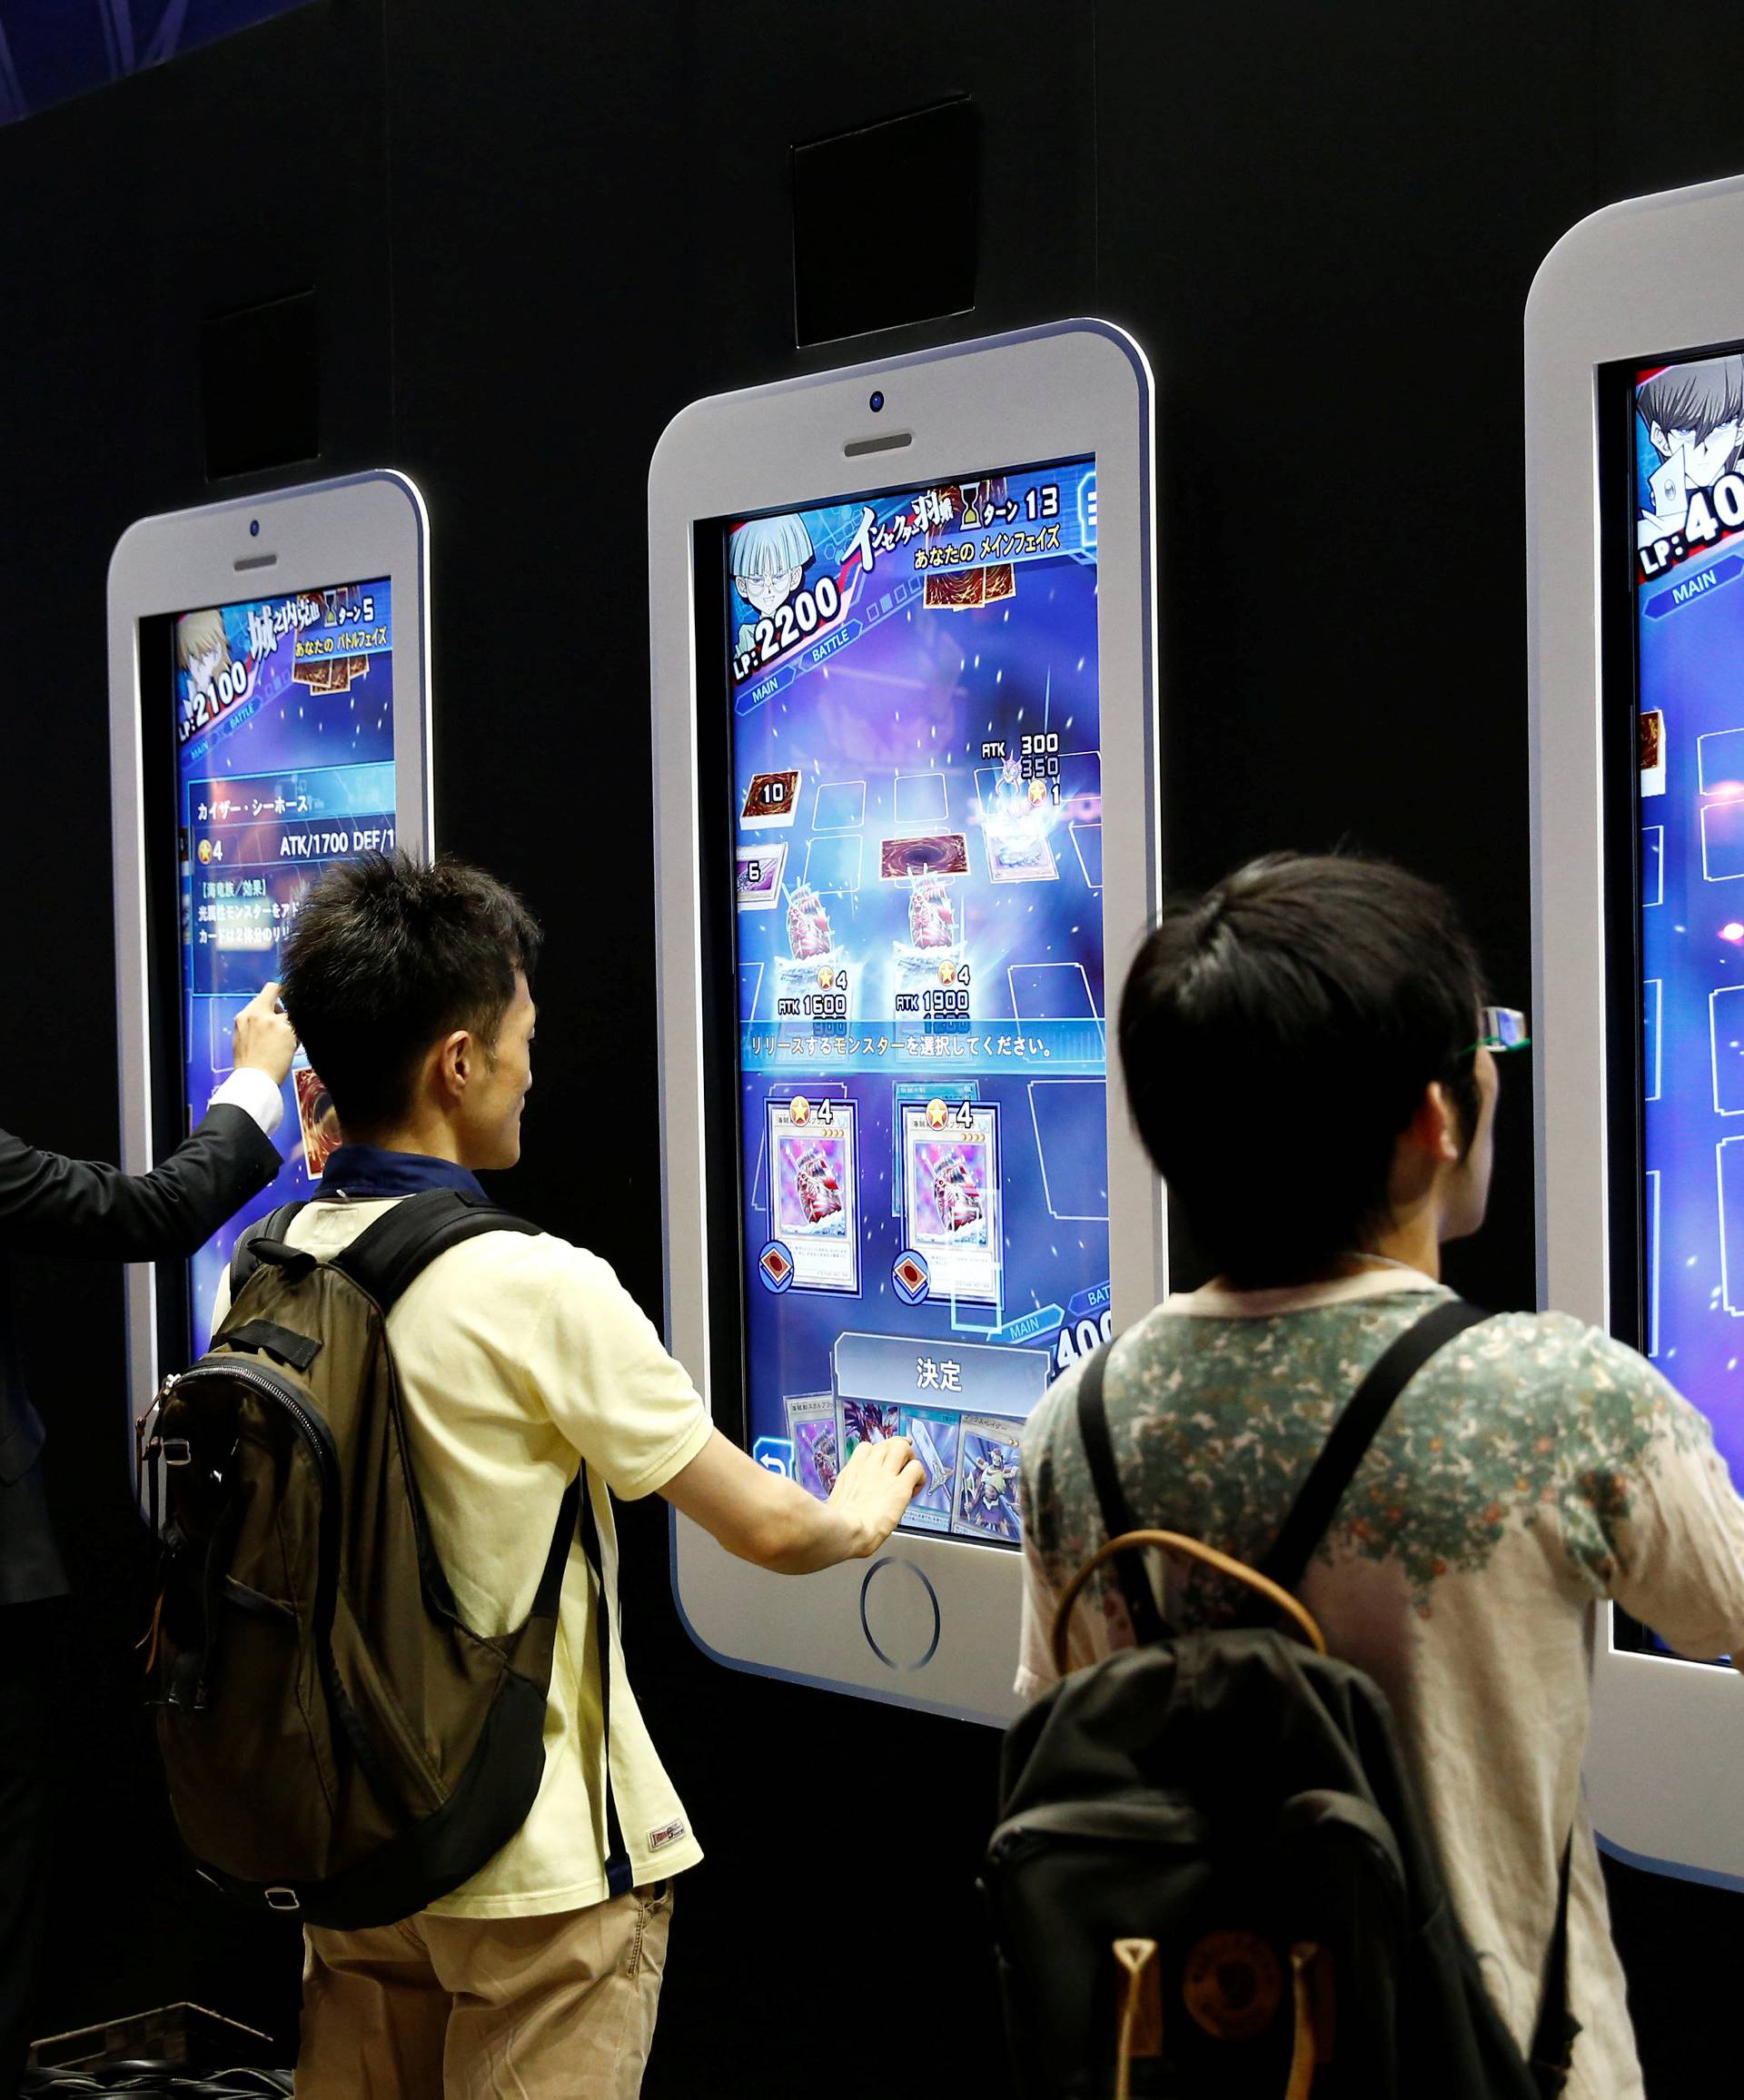 People play video games on mobile phone-shaped screens at Tokyo Game Show 2016 in Chiba